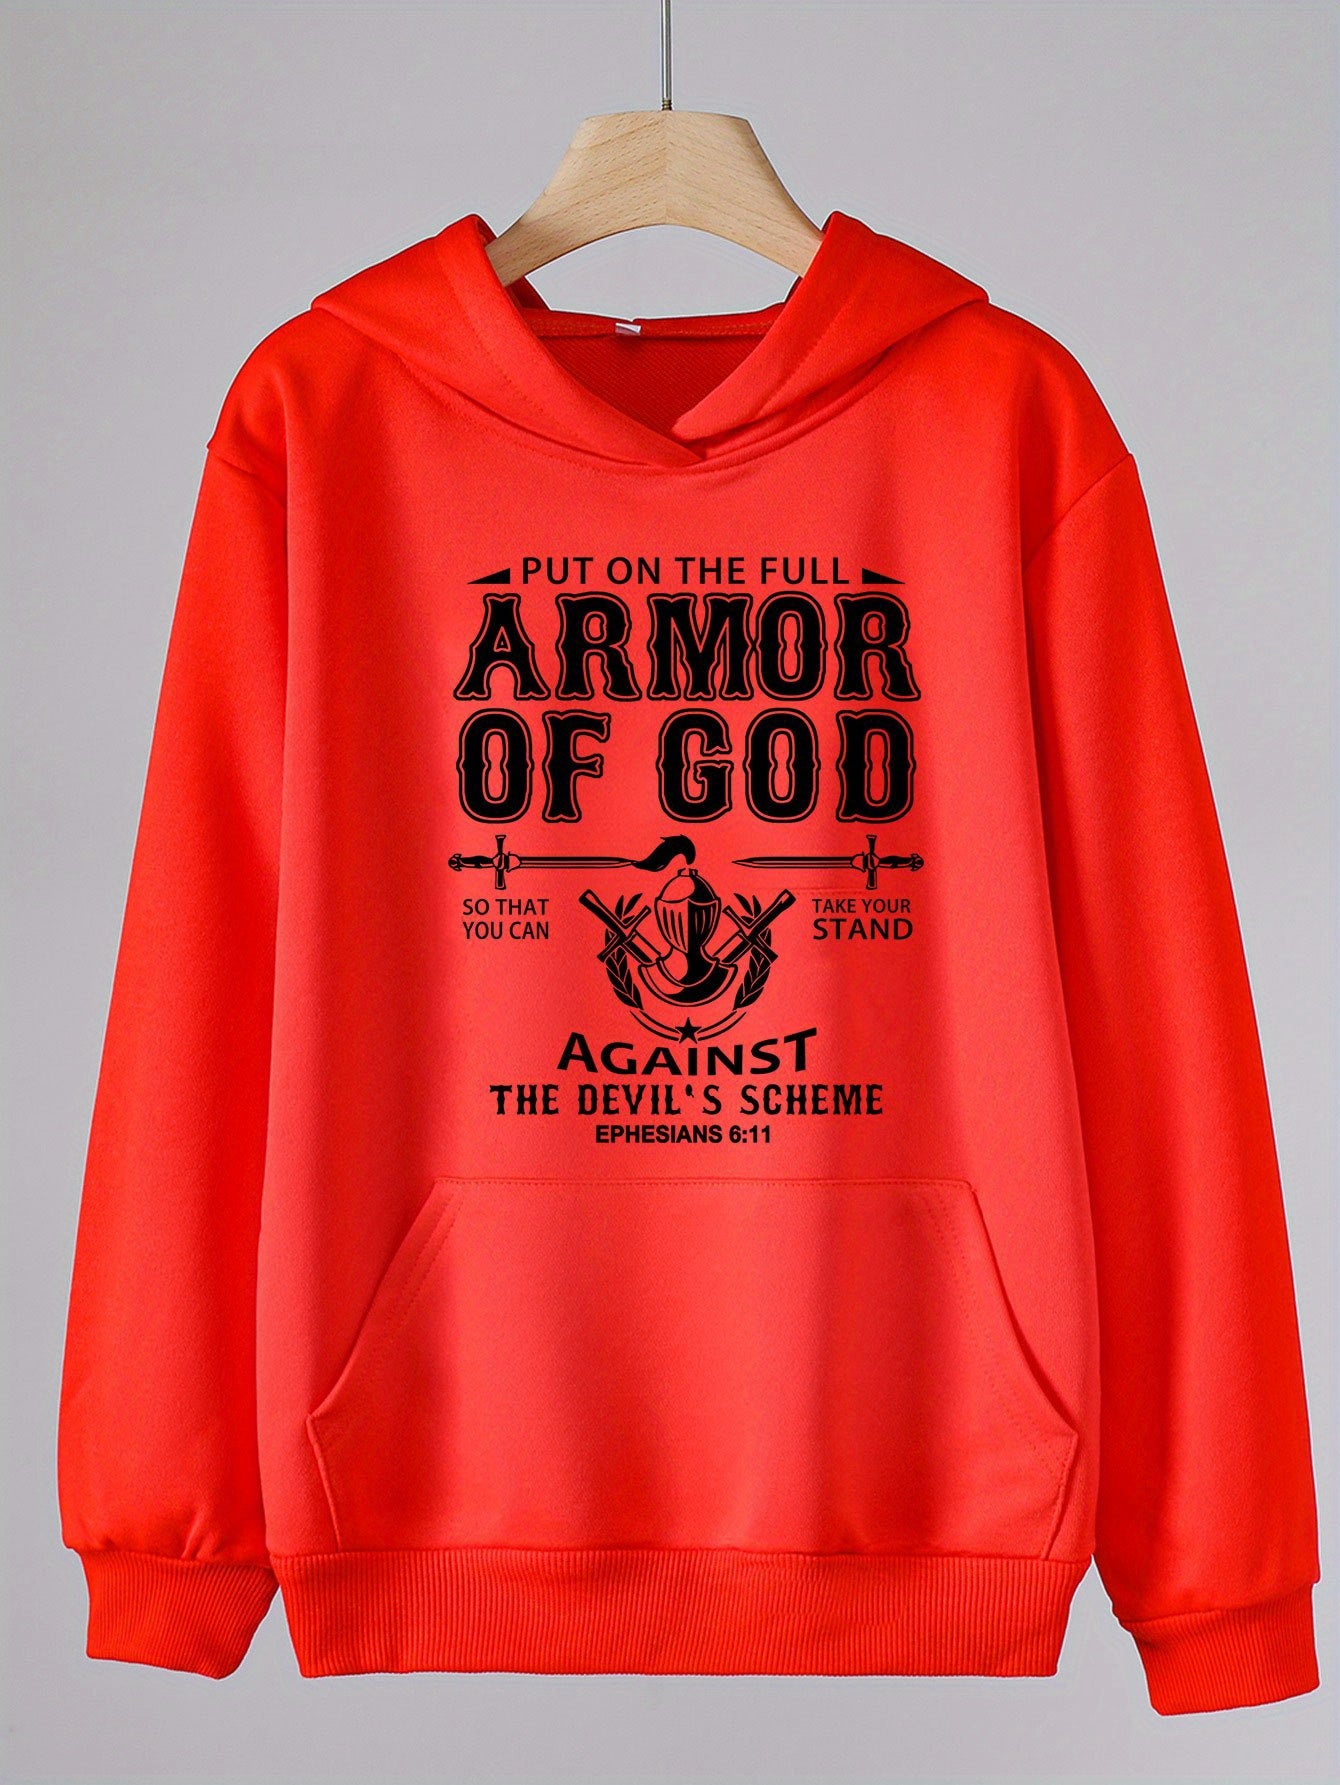 Put On The Full Armor Of God Youth Christian Pullover Hooded Sweatshirt claimedbygoddesigns